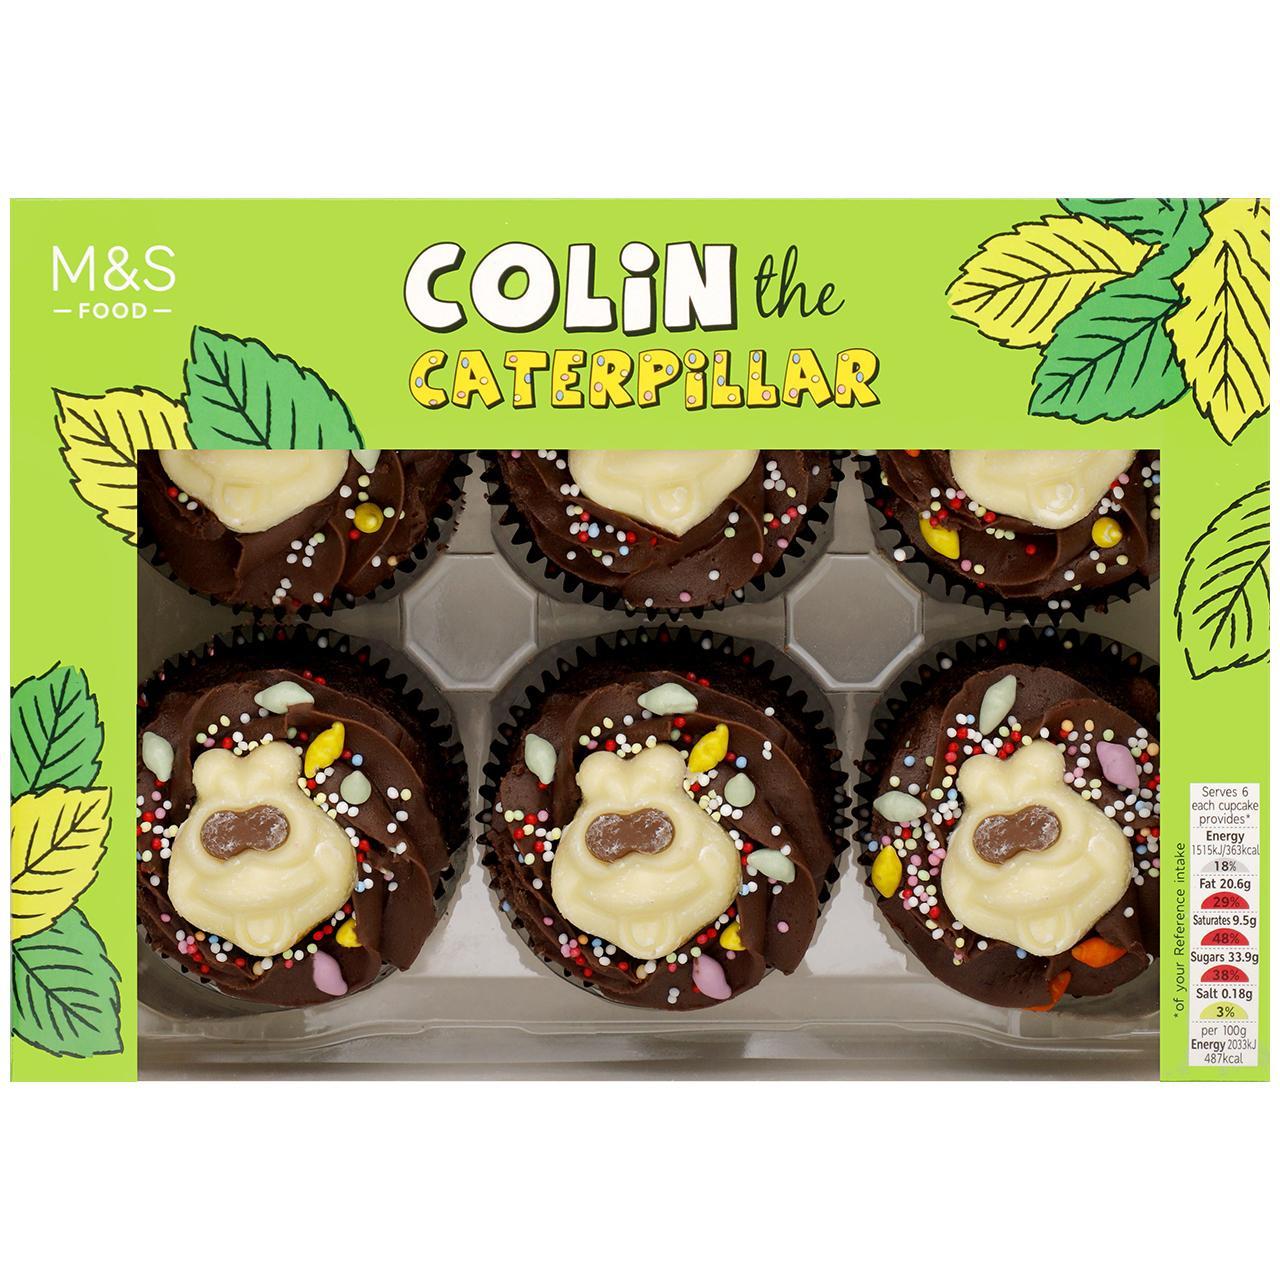 M&S Colin the Caterpillar Cupcakes 447g (limited availability)